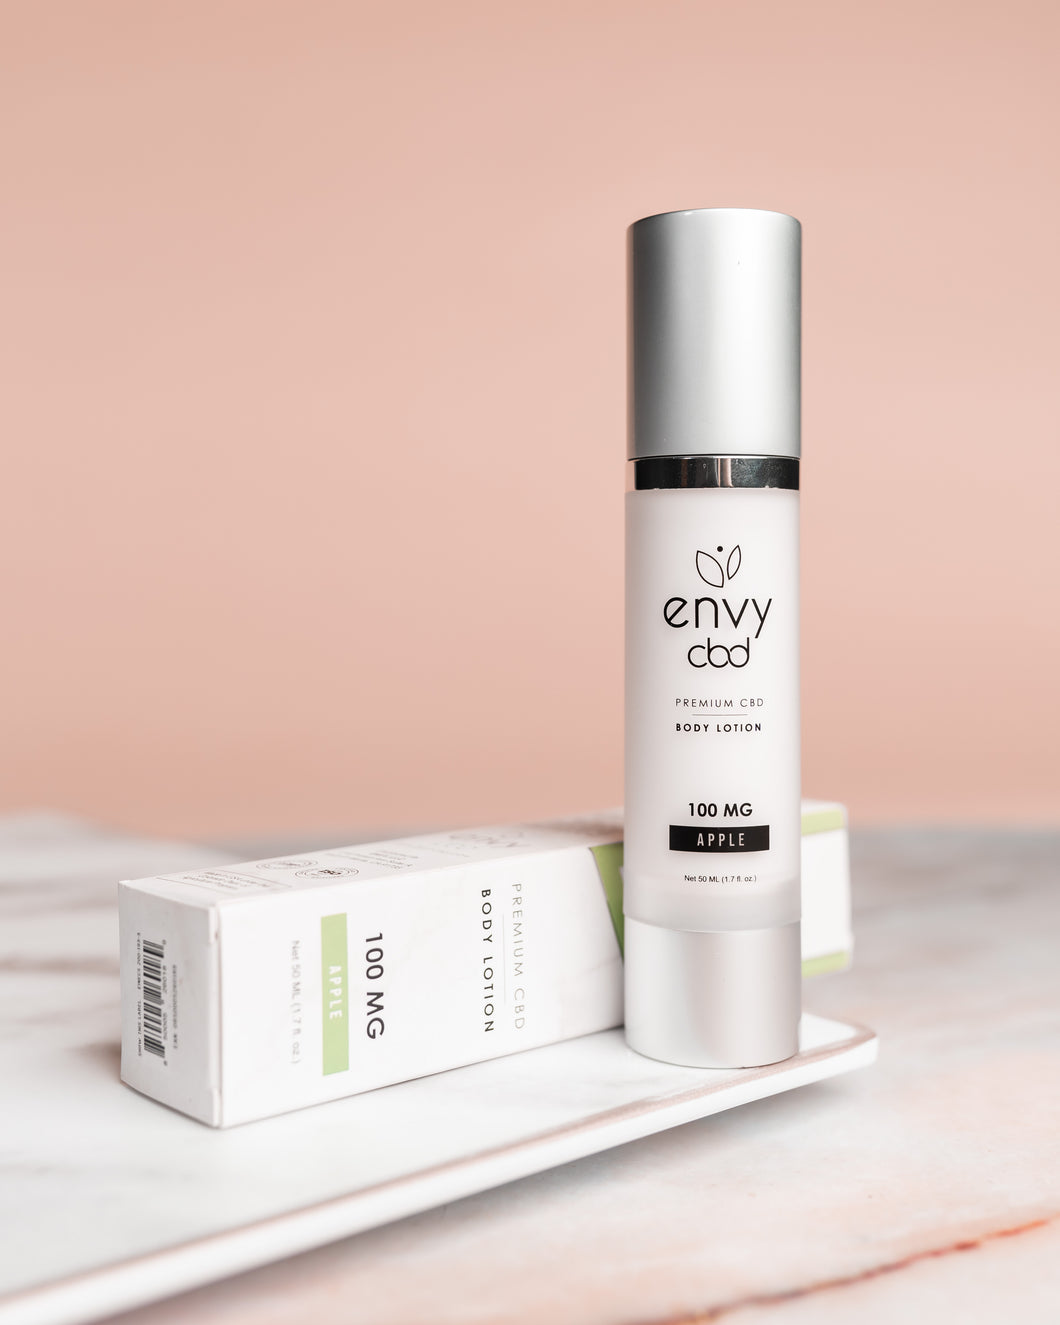 Envy Premium CBD Hemp extract Body Lotion Apple 100MG net 1.7 fl oz | Envy’s Green Apple-scented Body Lotion fuses its Full Spectrum hemp extract oil with organic ingredients designed to restore the skin to its natural beauty and glow